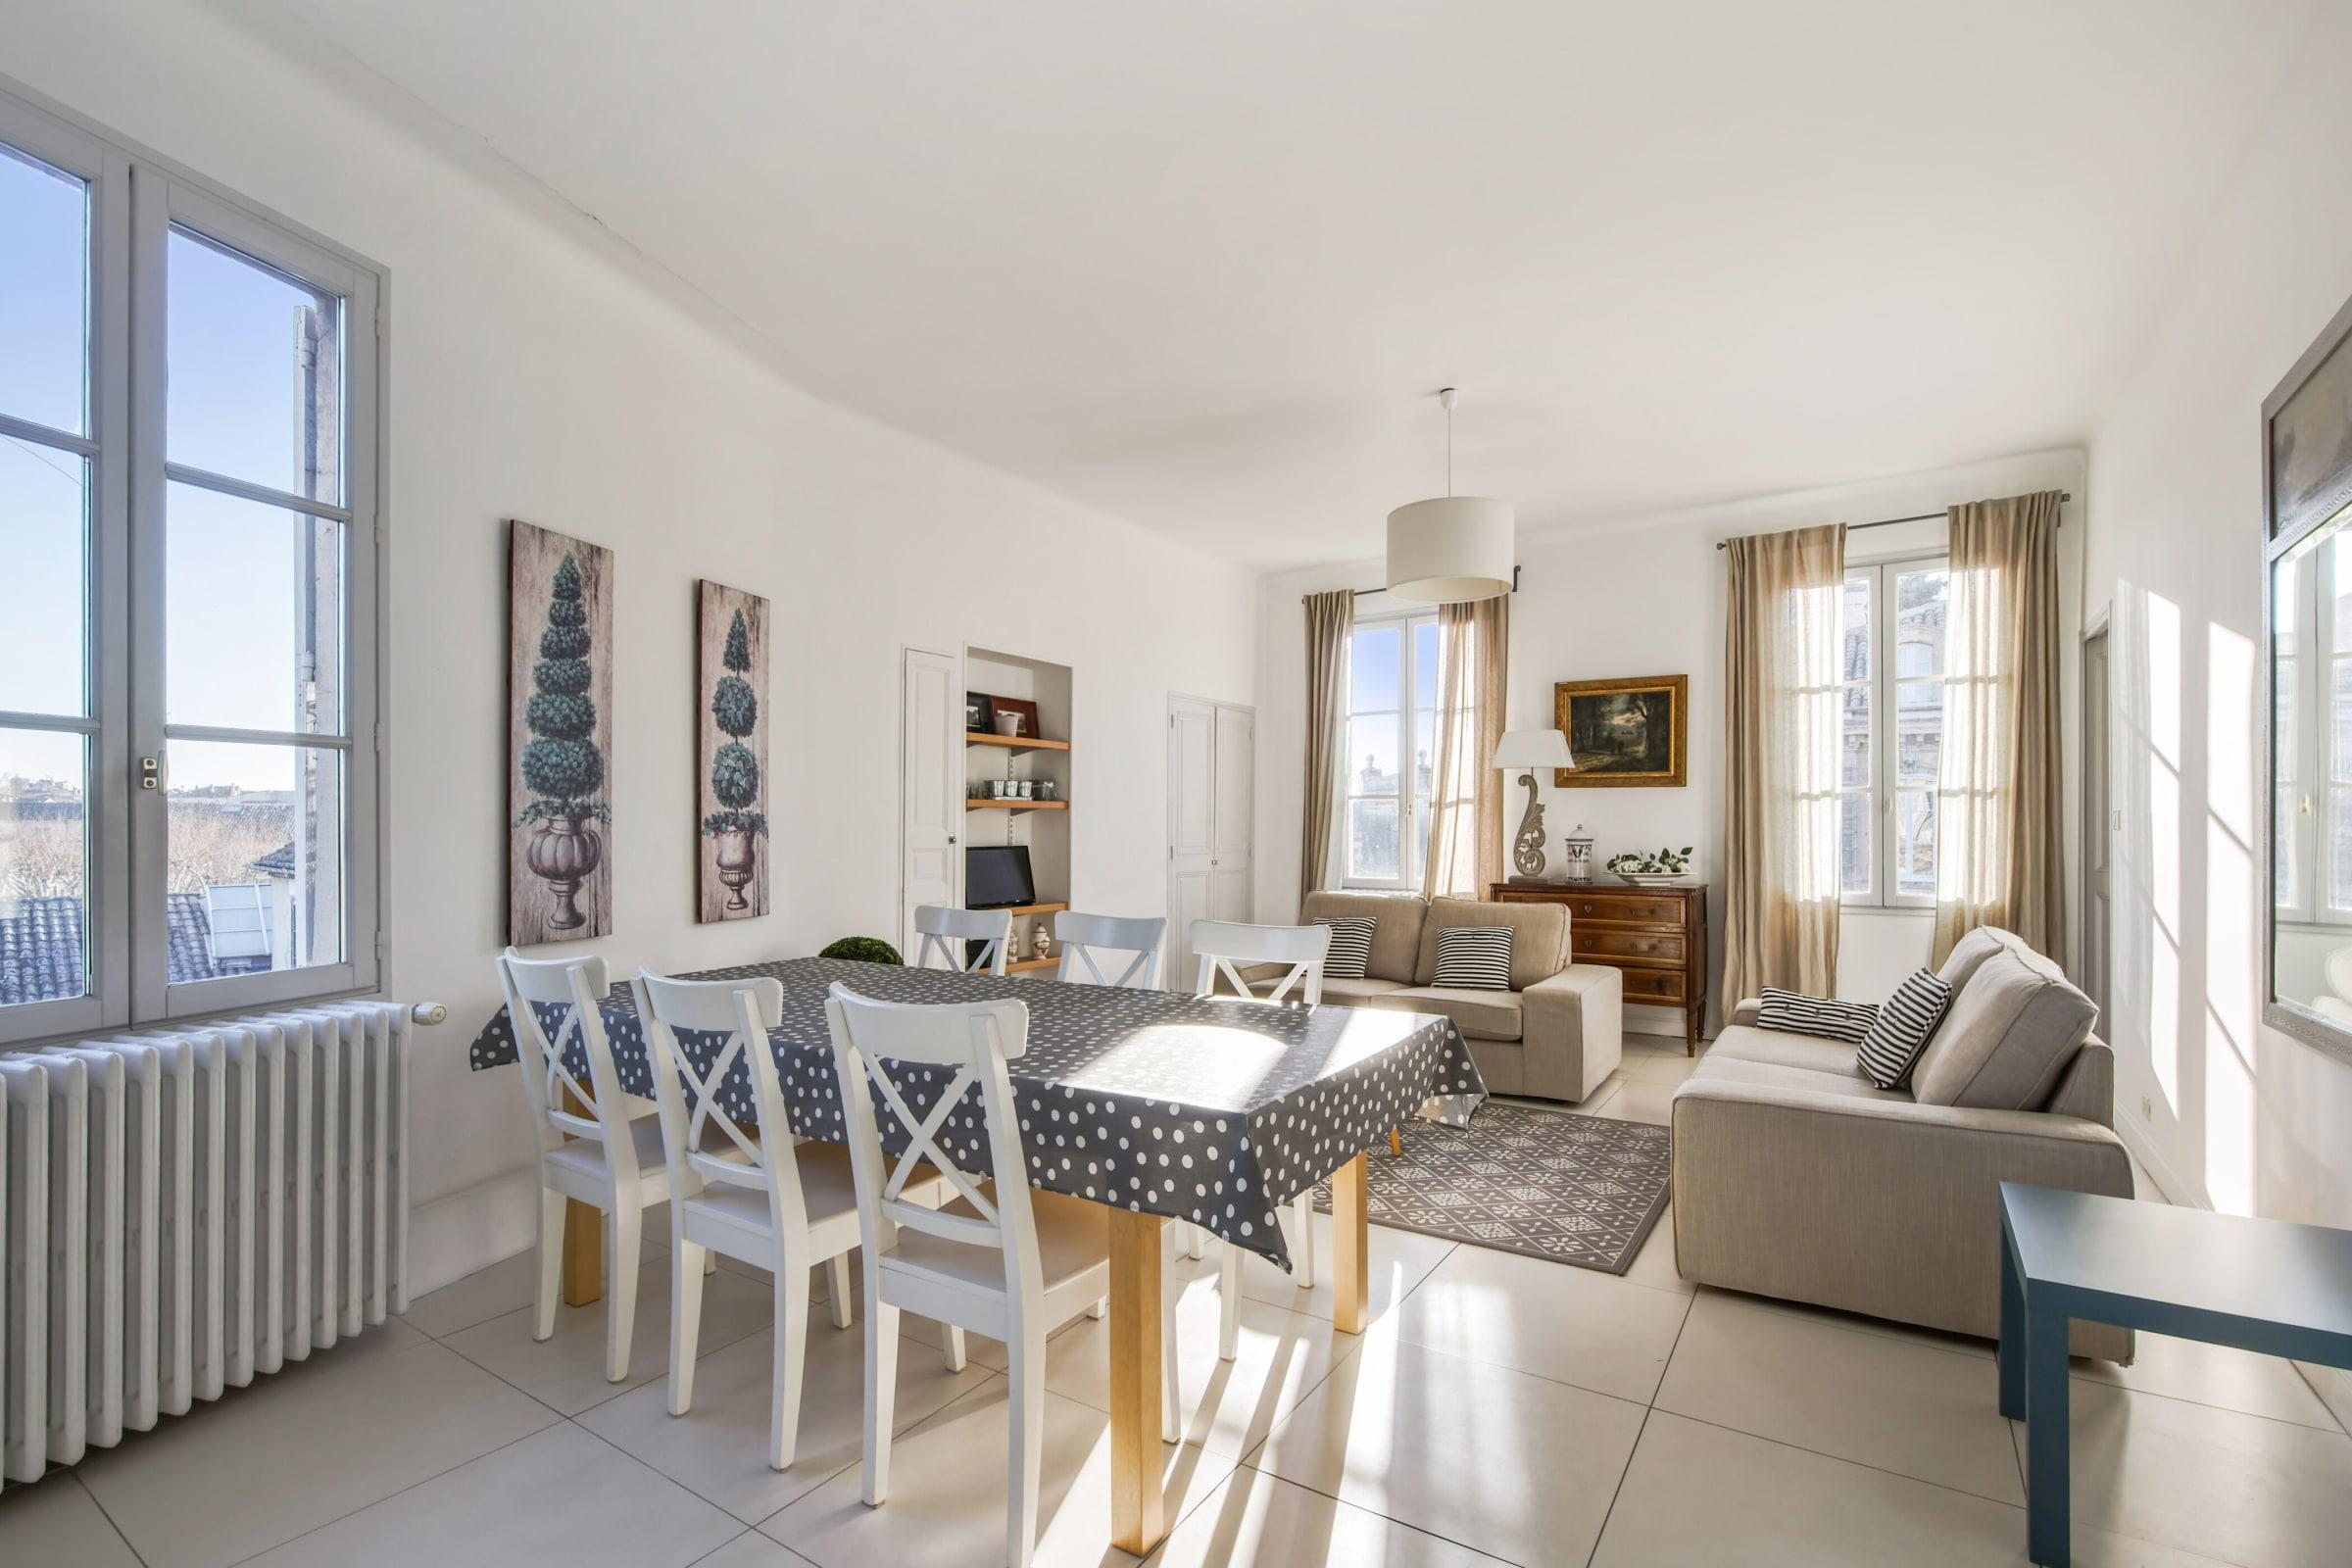 Property Image 2 - Beautiful flat in a character house in the heart of Avignon